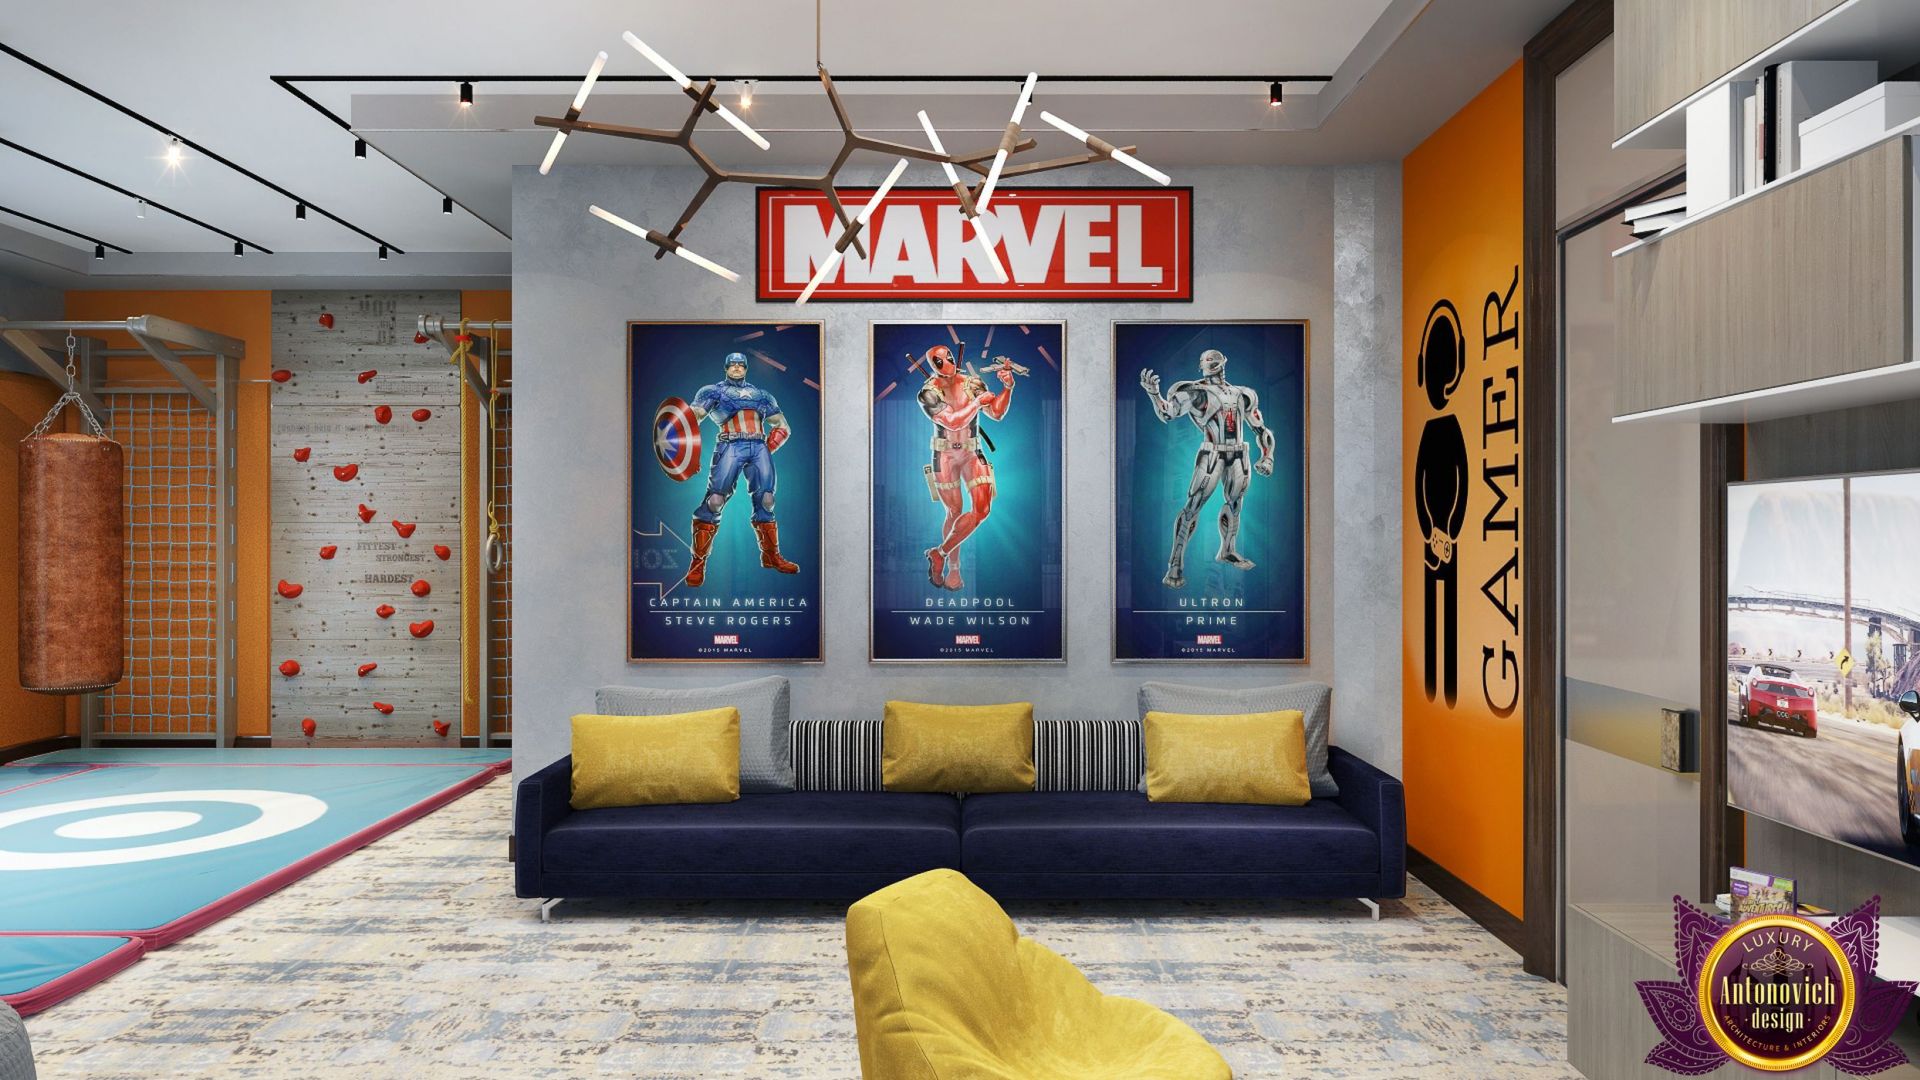 Creative wall art ideas for a personalized teen bedroom